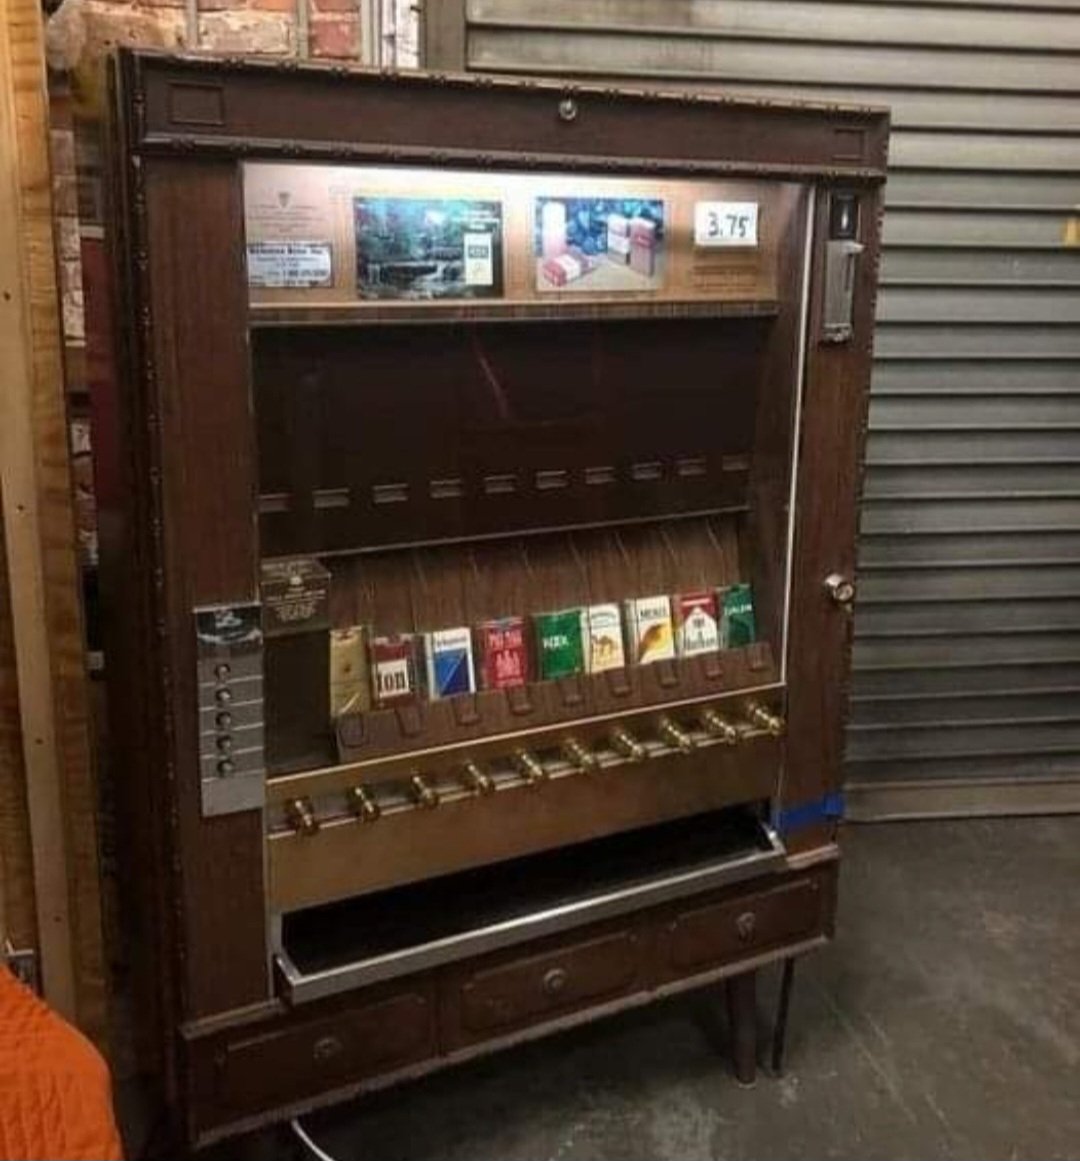 I'm old enough to remember when anyone could just walk up and put money into one of these...